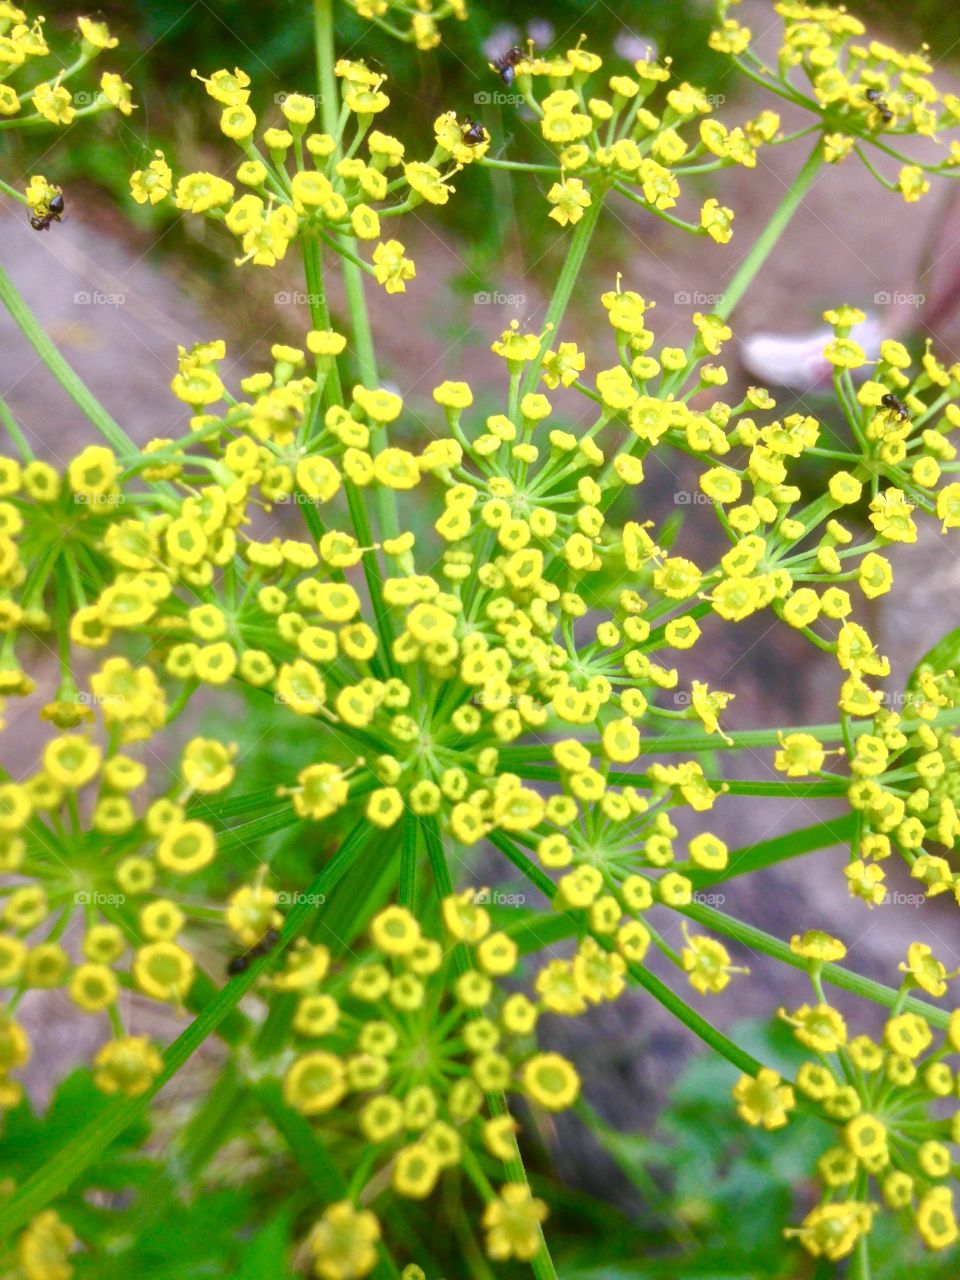 Up close and personal with a yellow plant